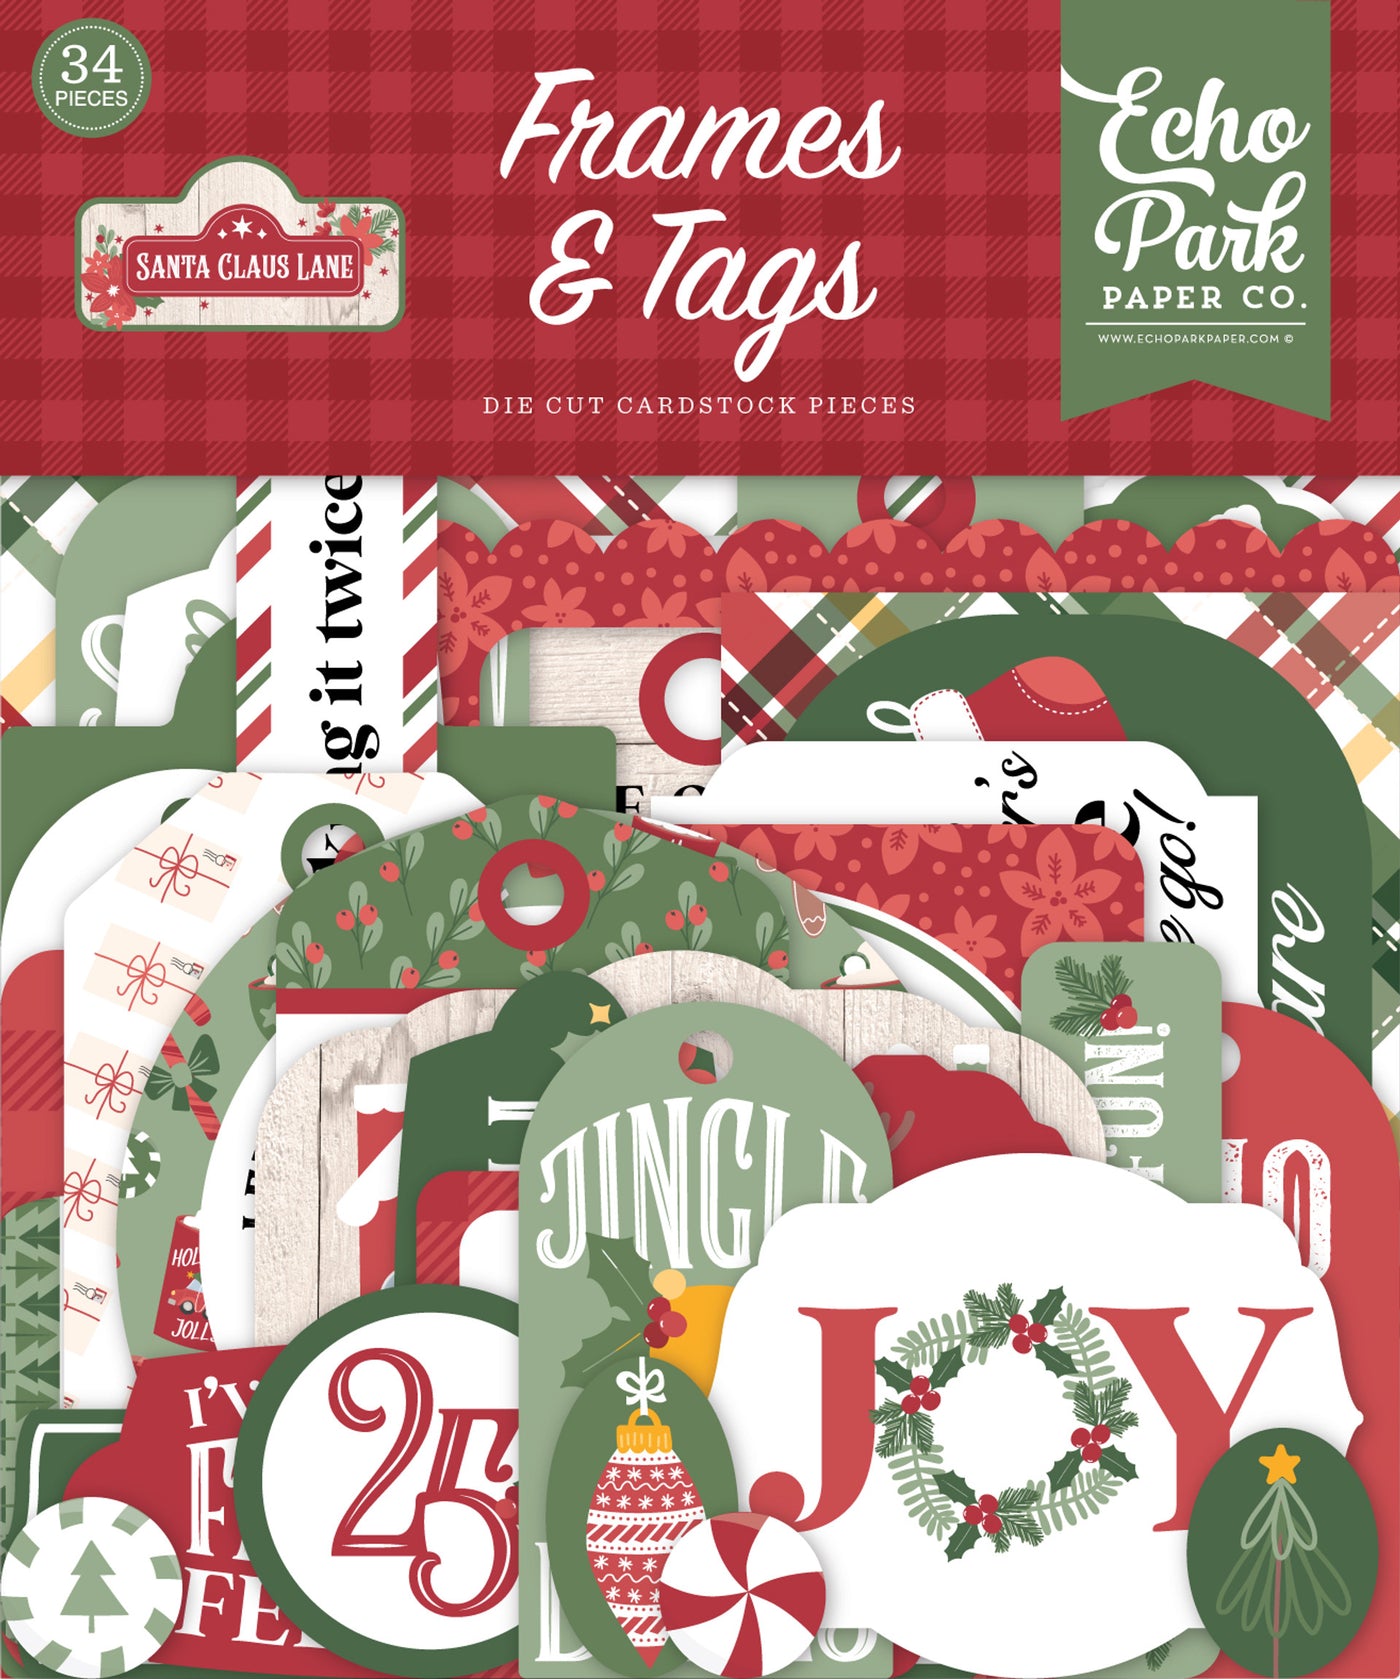 Santa Claus Lane Frames & Tags Die Cut Cardstock Pack.  Pack includes 34 different die-cut shapes ready to embellish any project.